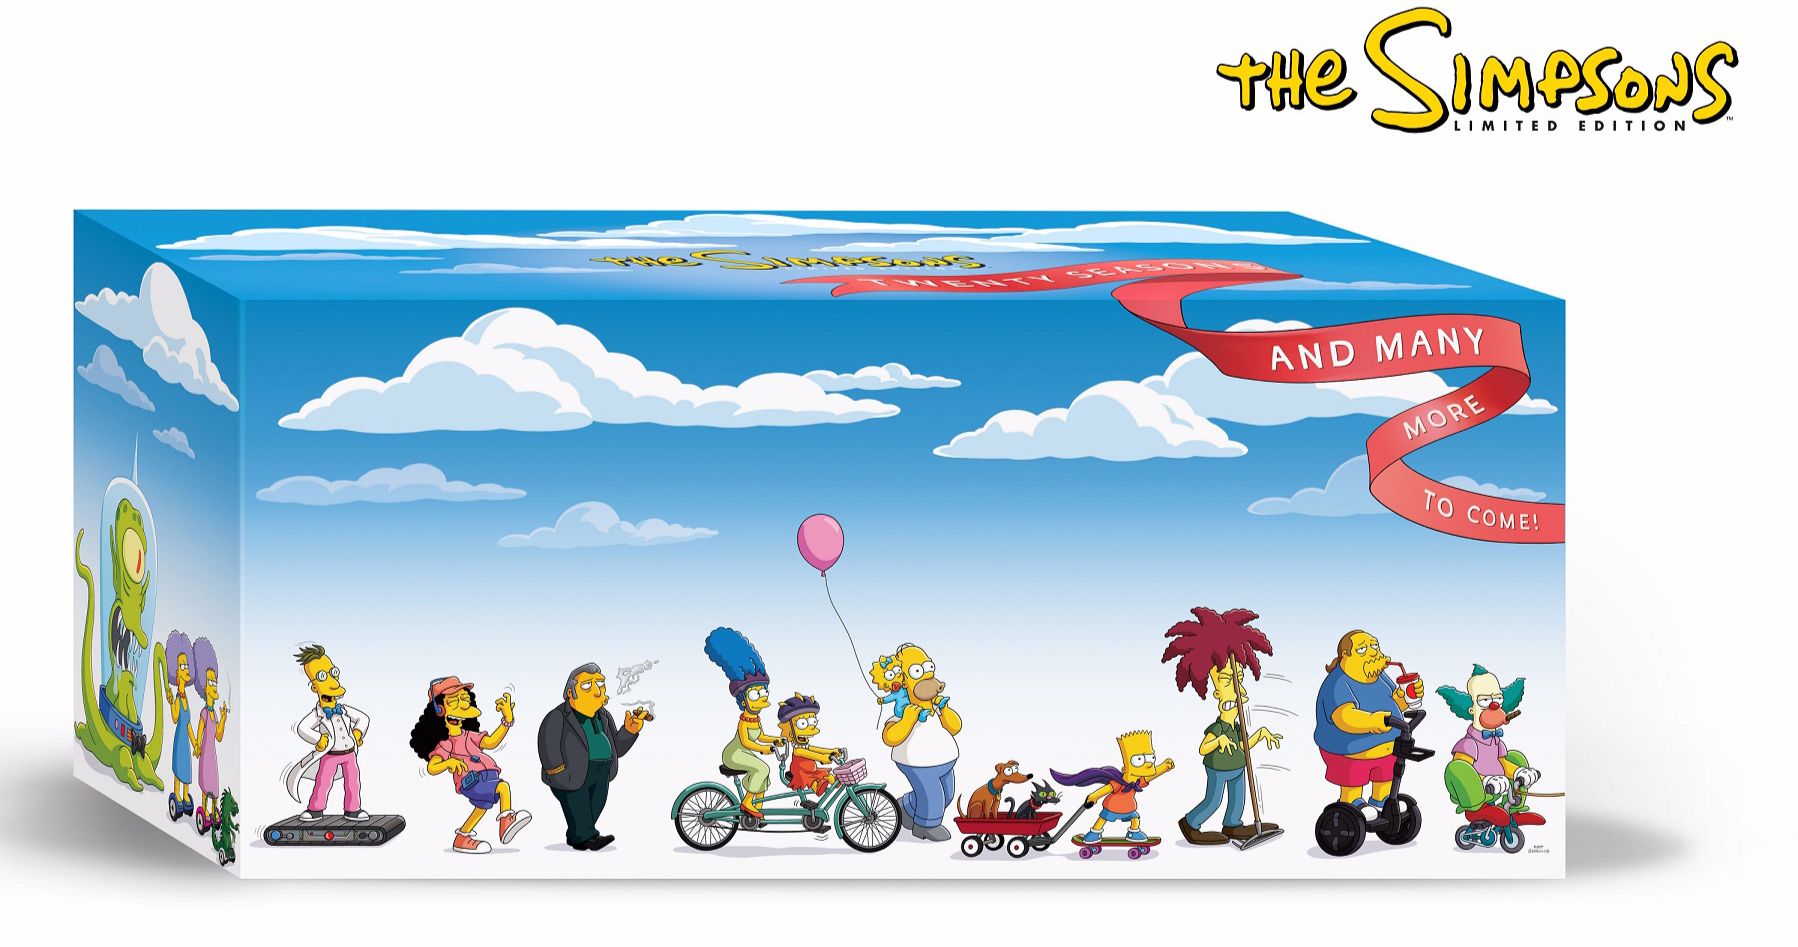 The Simpsons First 20 Seasons Box Set Is Limited to Just 1K Copies